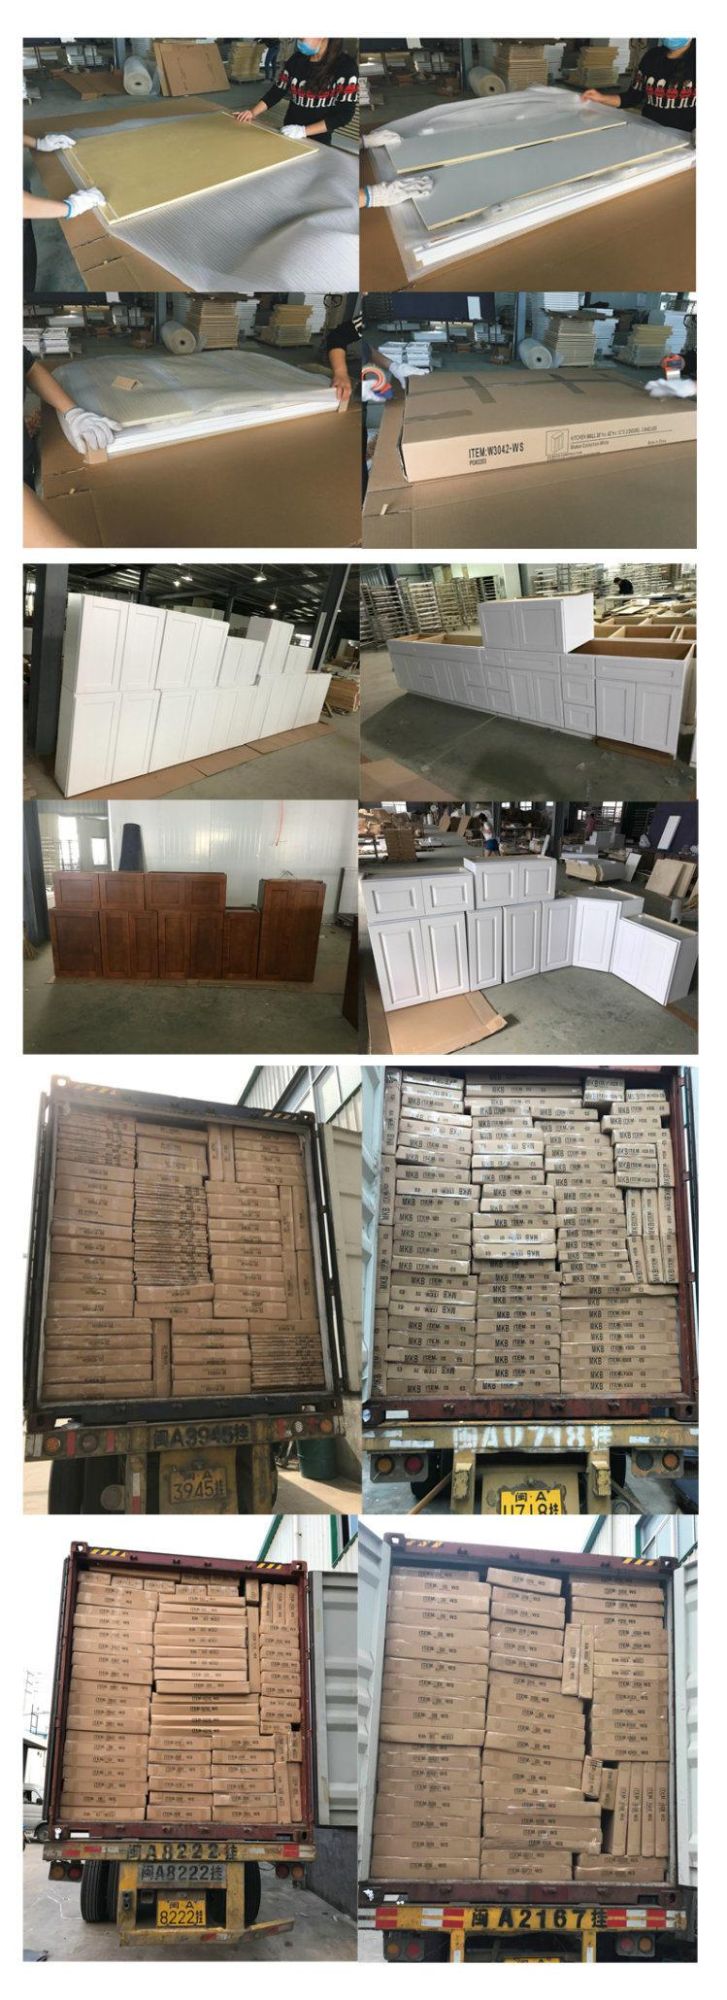 ISO9001 Approved Three Section Track Modern Furniture Kitchen Cabinets for Wholesalers